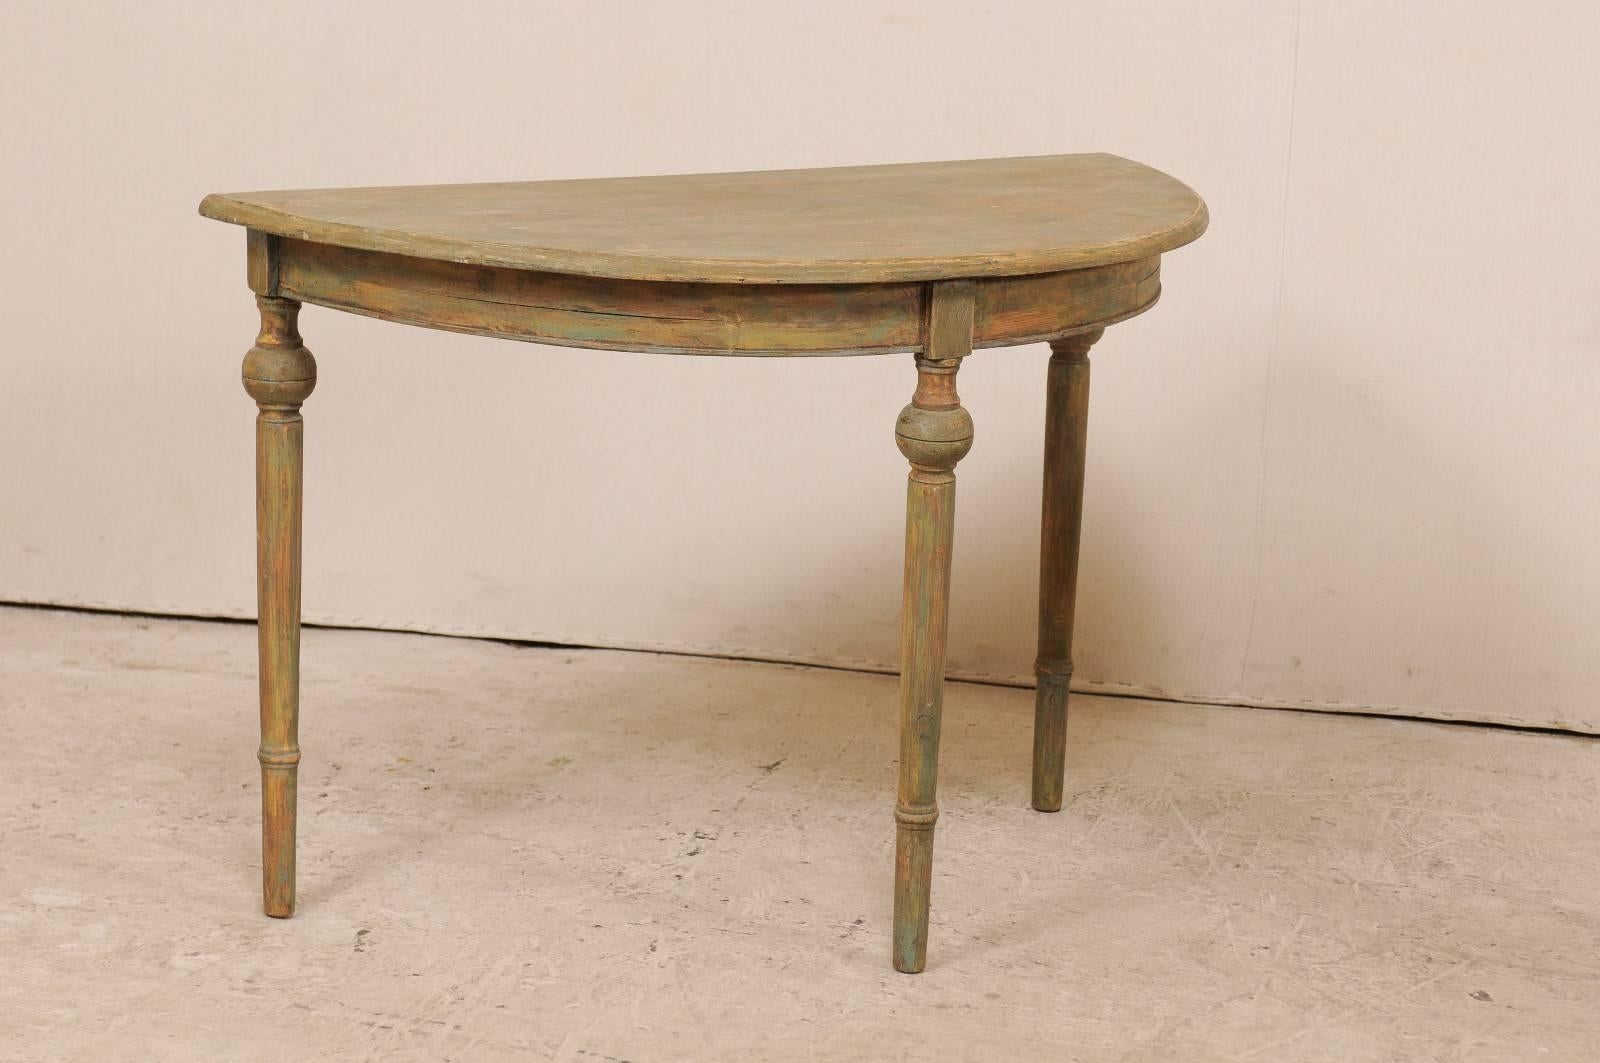 Turned Pair of 19th Century Swedish Painted Wood Demilune Tables in Warm Sage Hues